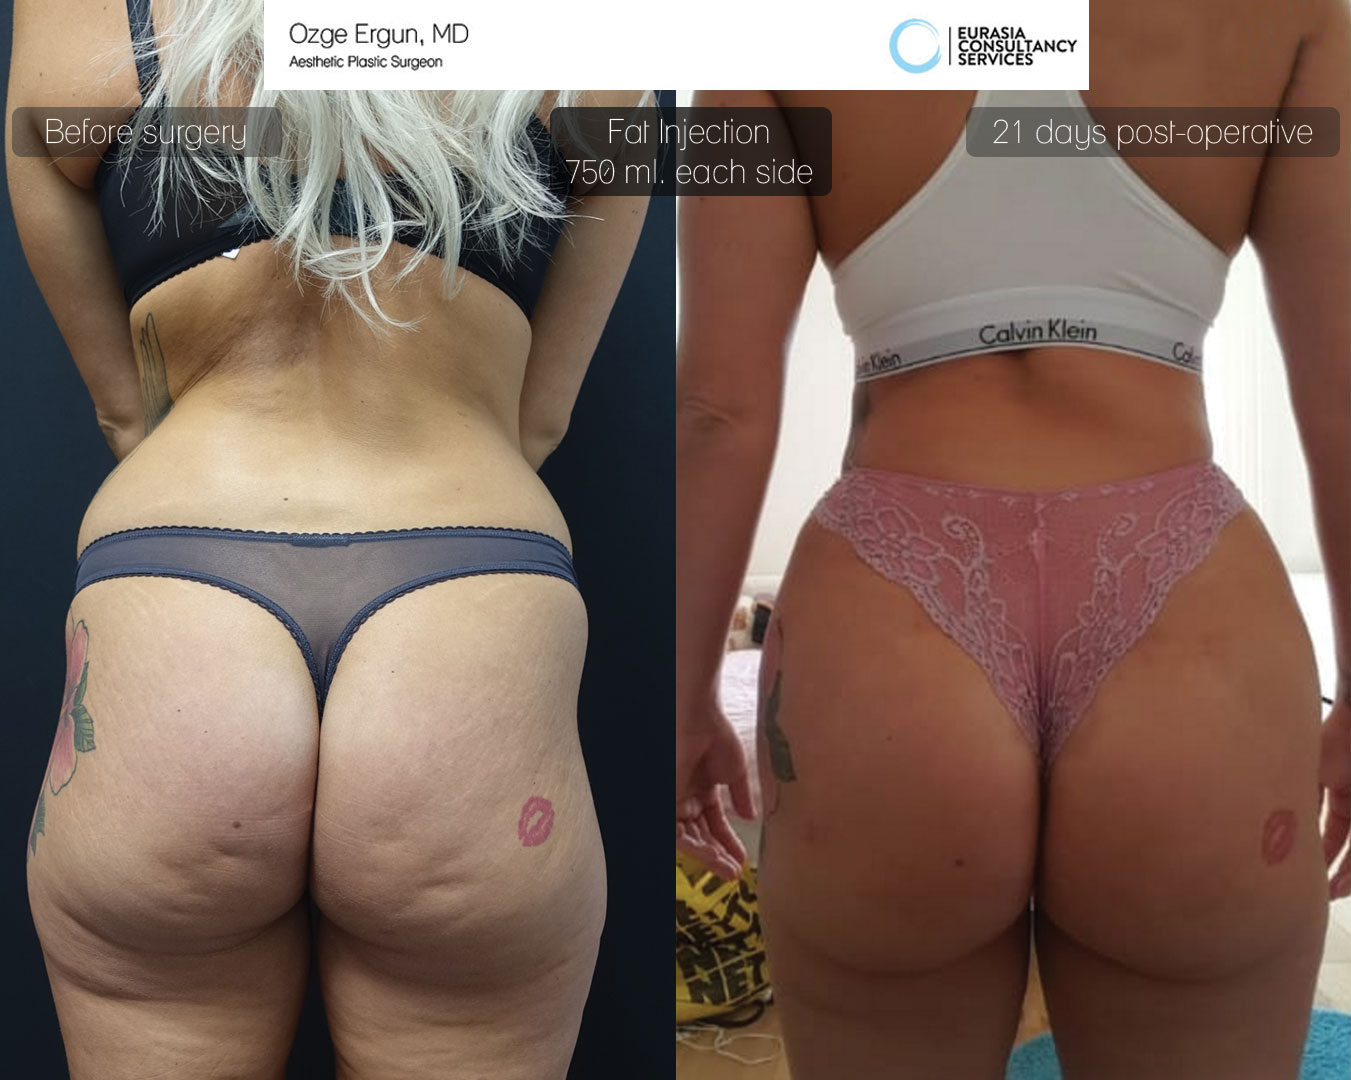 Brazilian Butt Lift - Plastic Surgery Before and After Photos